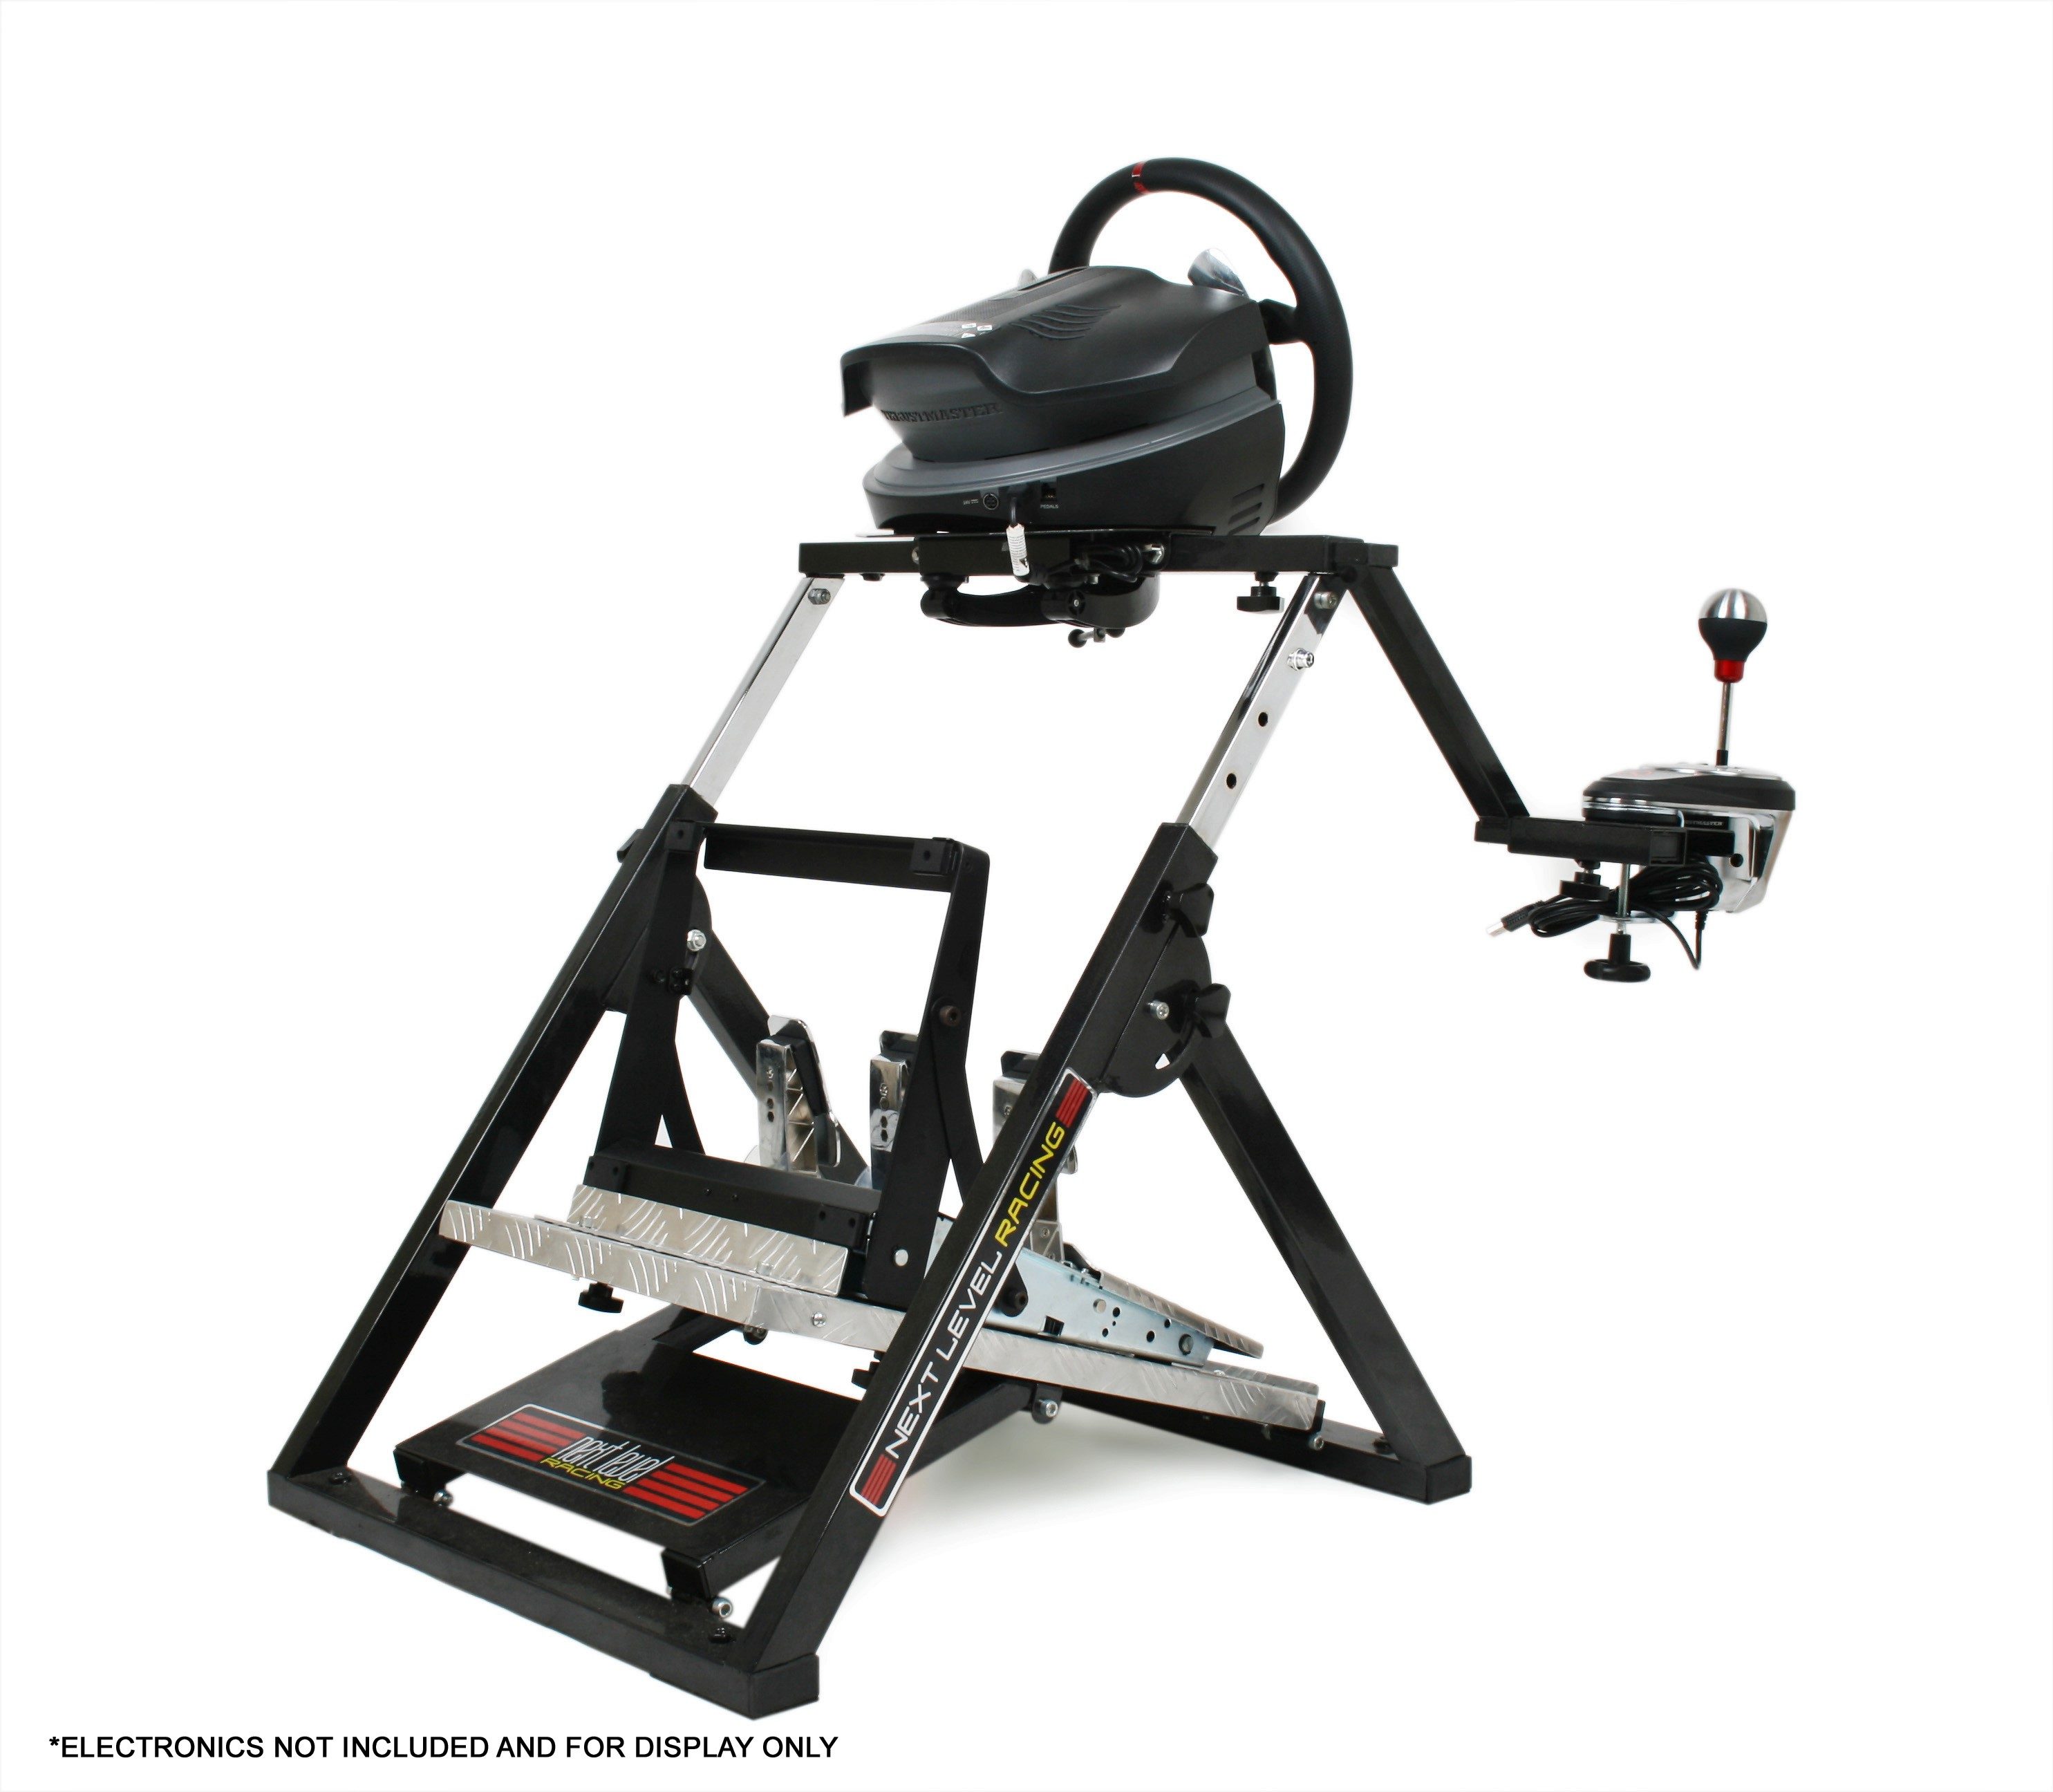 36. Having a space problem I can only purchase an next level wheel stand , ...